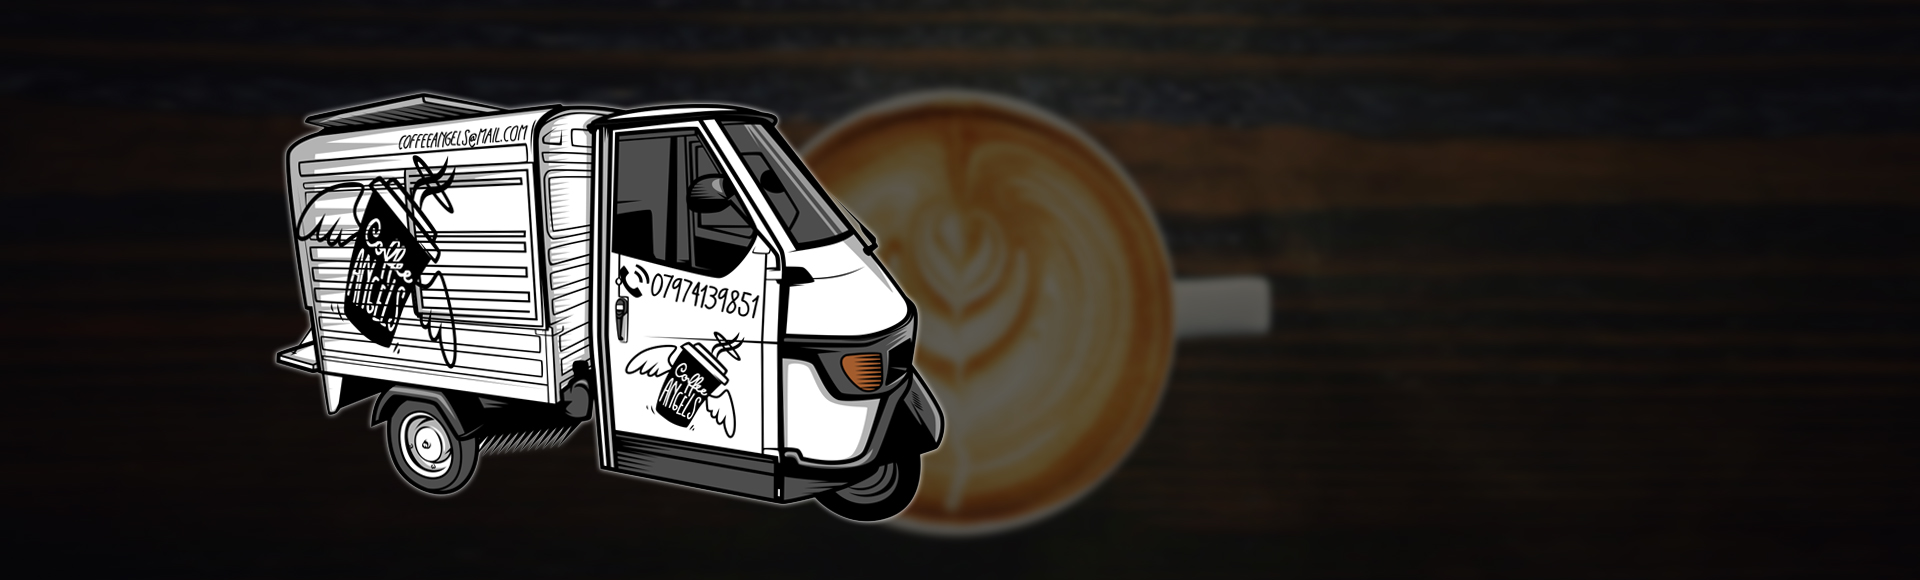 Coffee Angels Mobile Catering NI